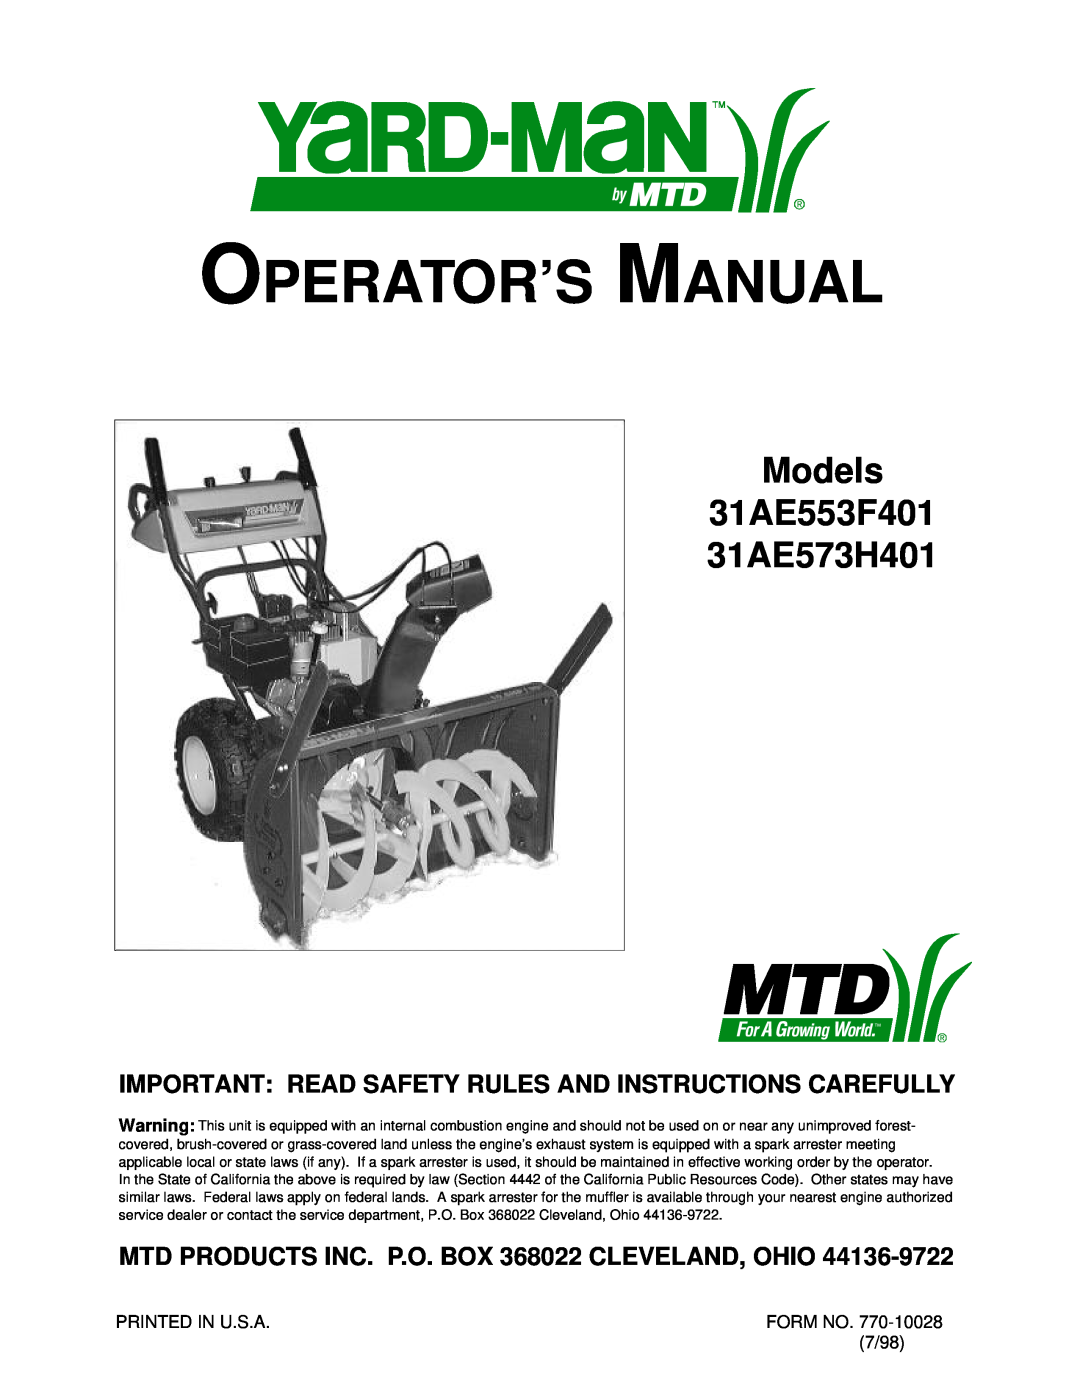 Yard-Man 31AE553F401, 31AE573H401 manual Important Read Safety Rules And Instructions Carefully, Operator’S Manual 